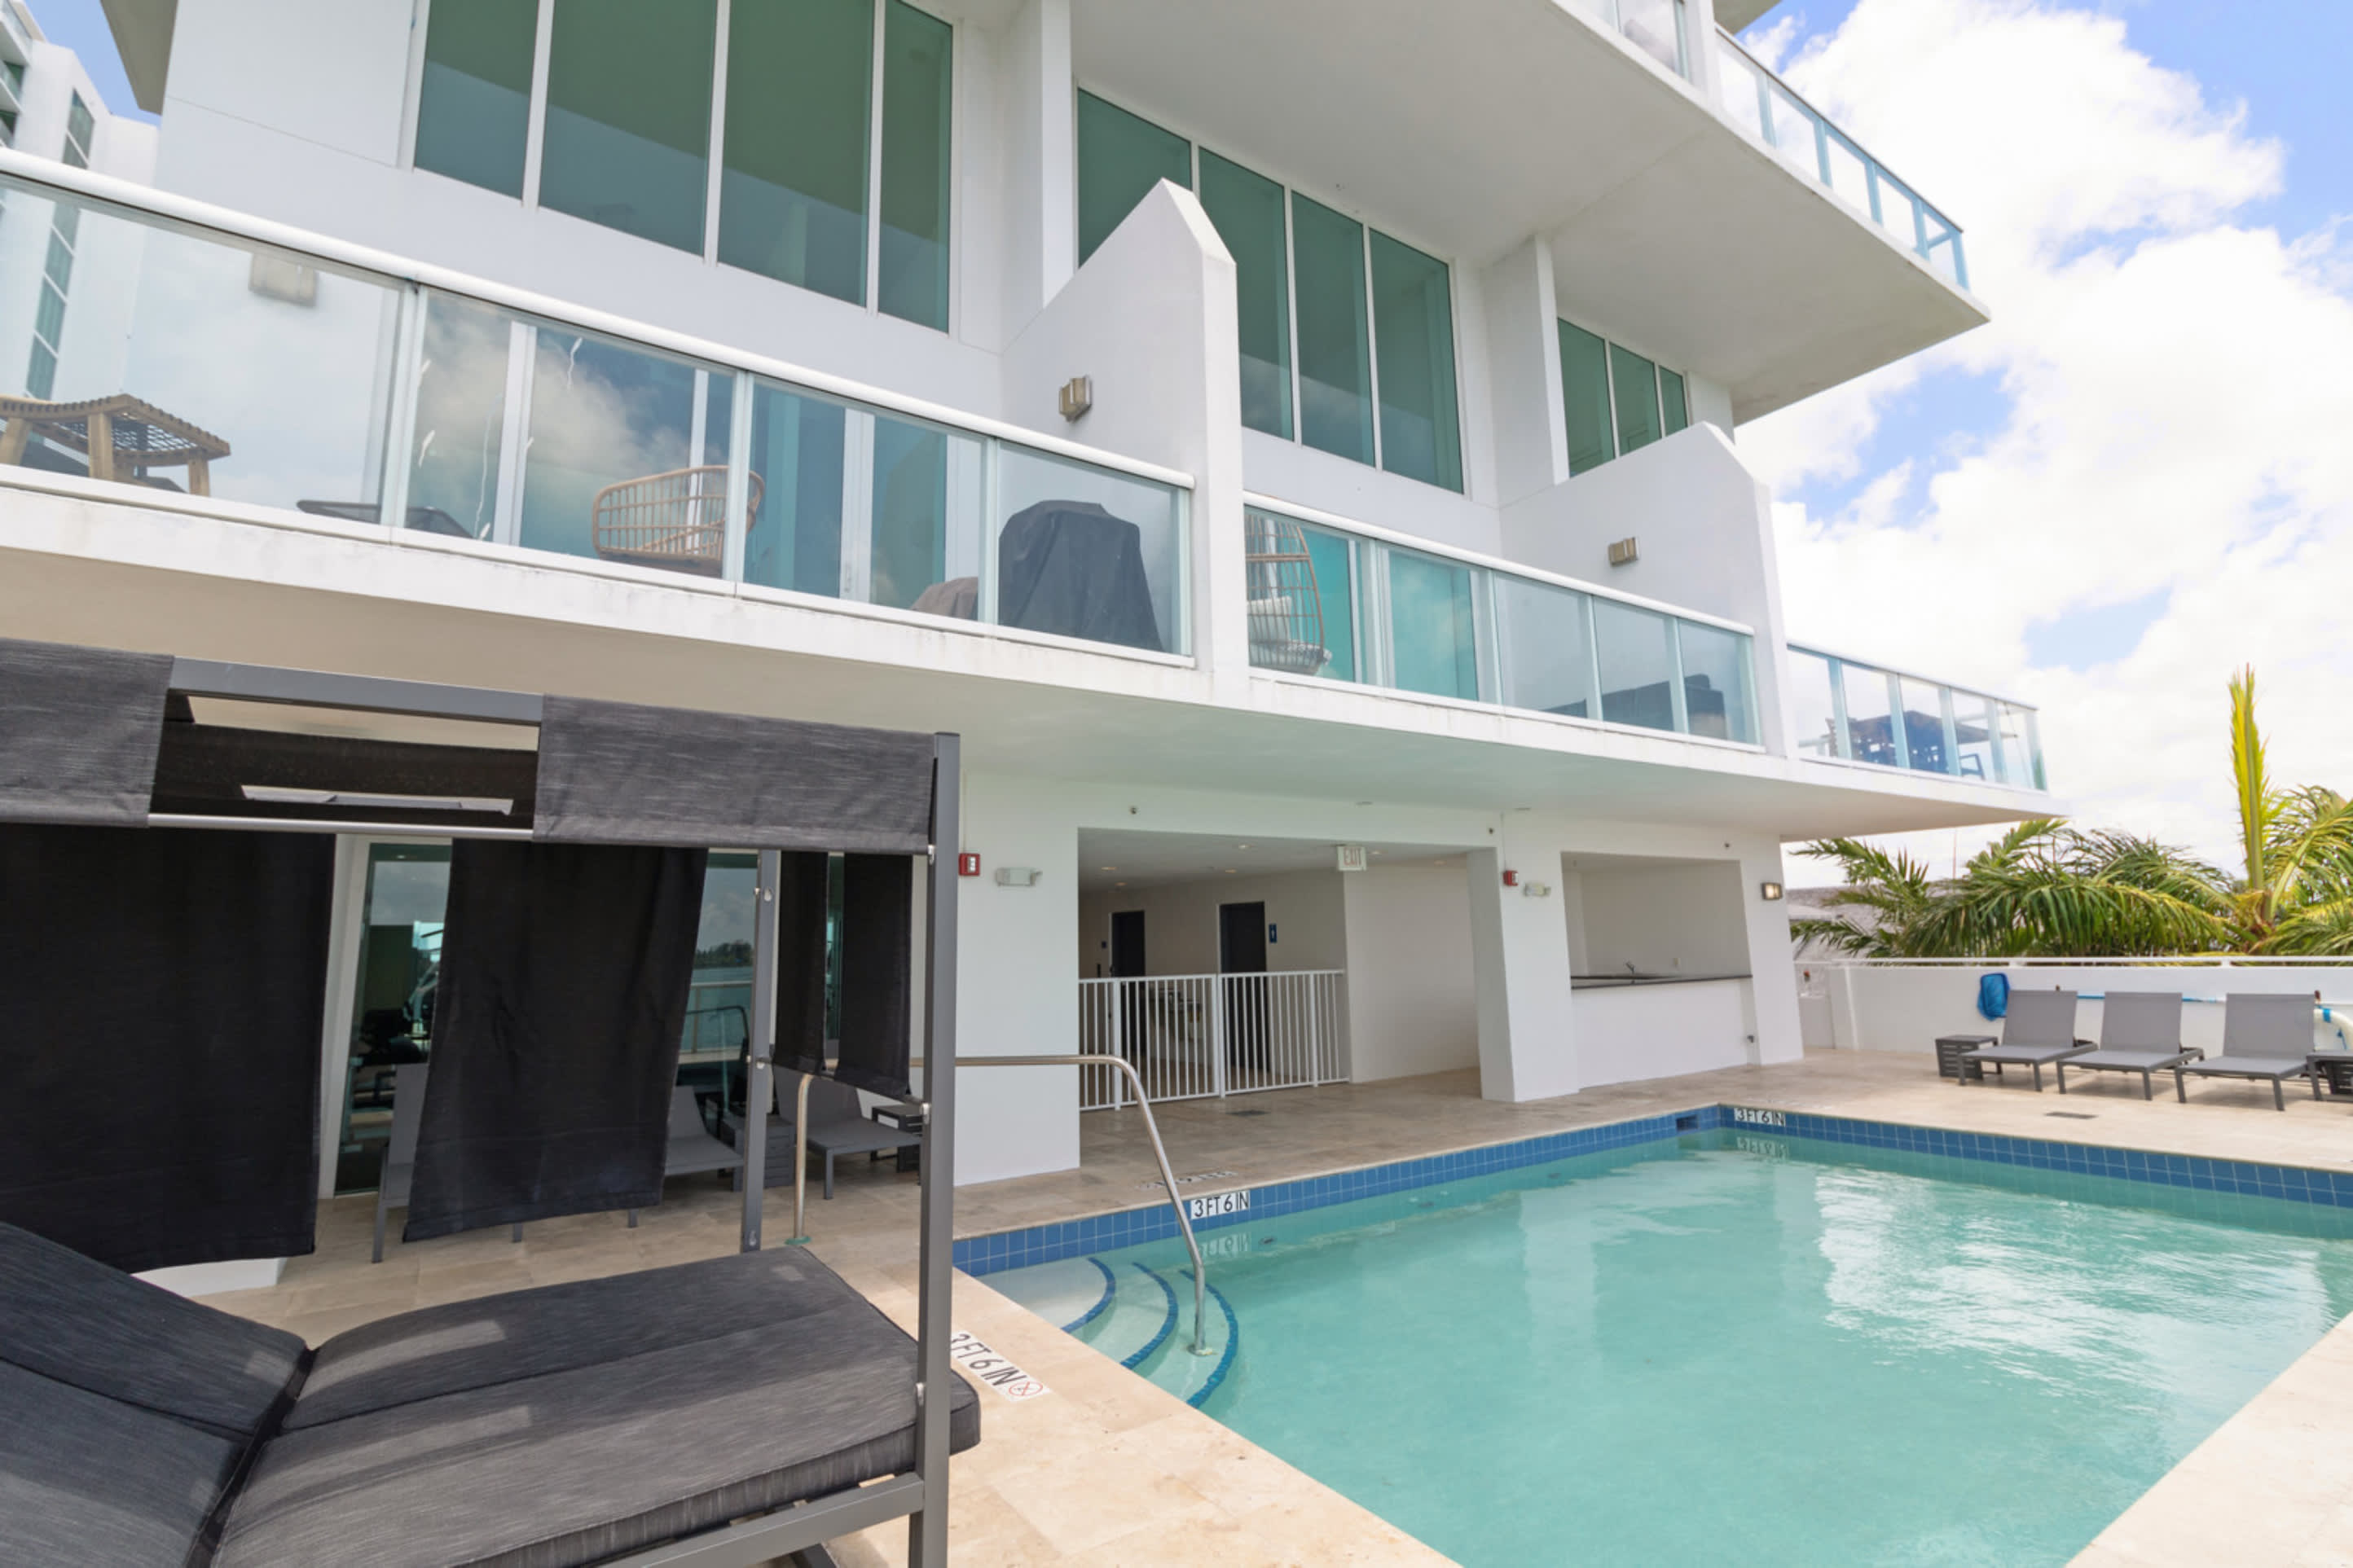 2-Story Waterfront Condo | Heated Pool | 10 mins to Beach